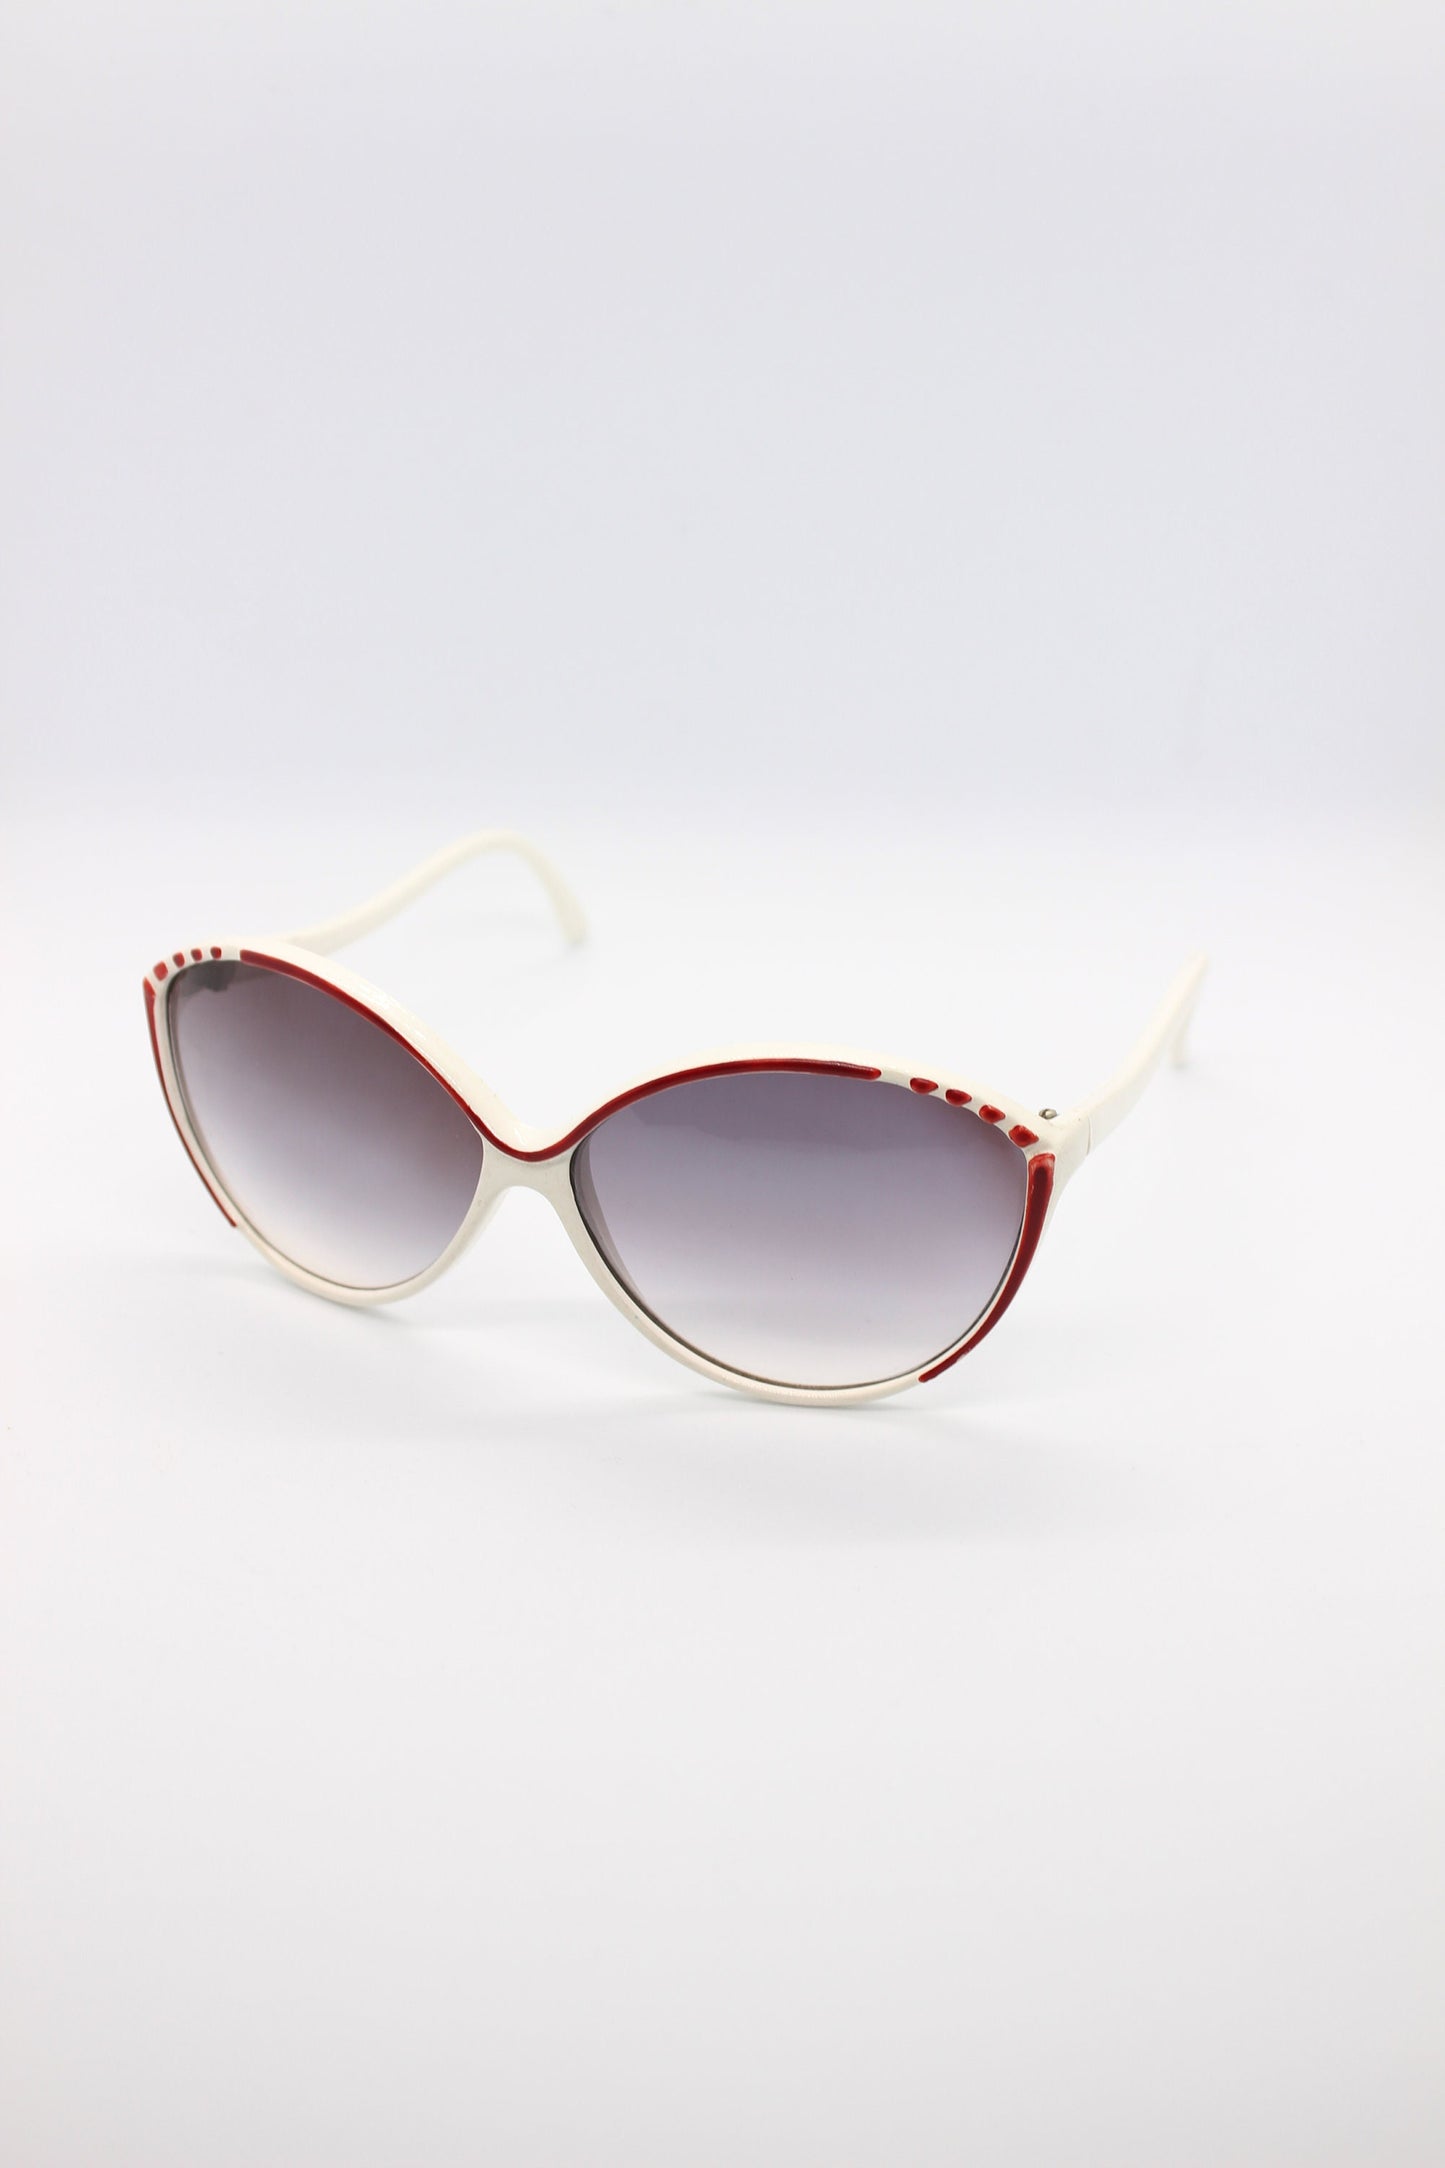 WHITE VINTAGE SUNGLASSES never worn. White frame with red details and grey gradient lenses